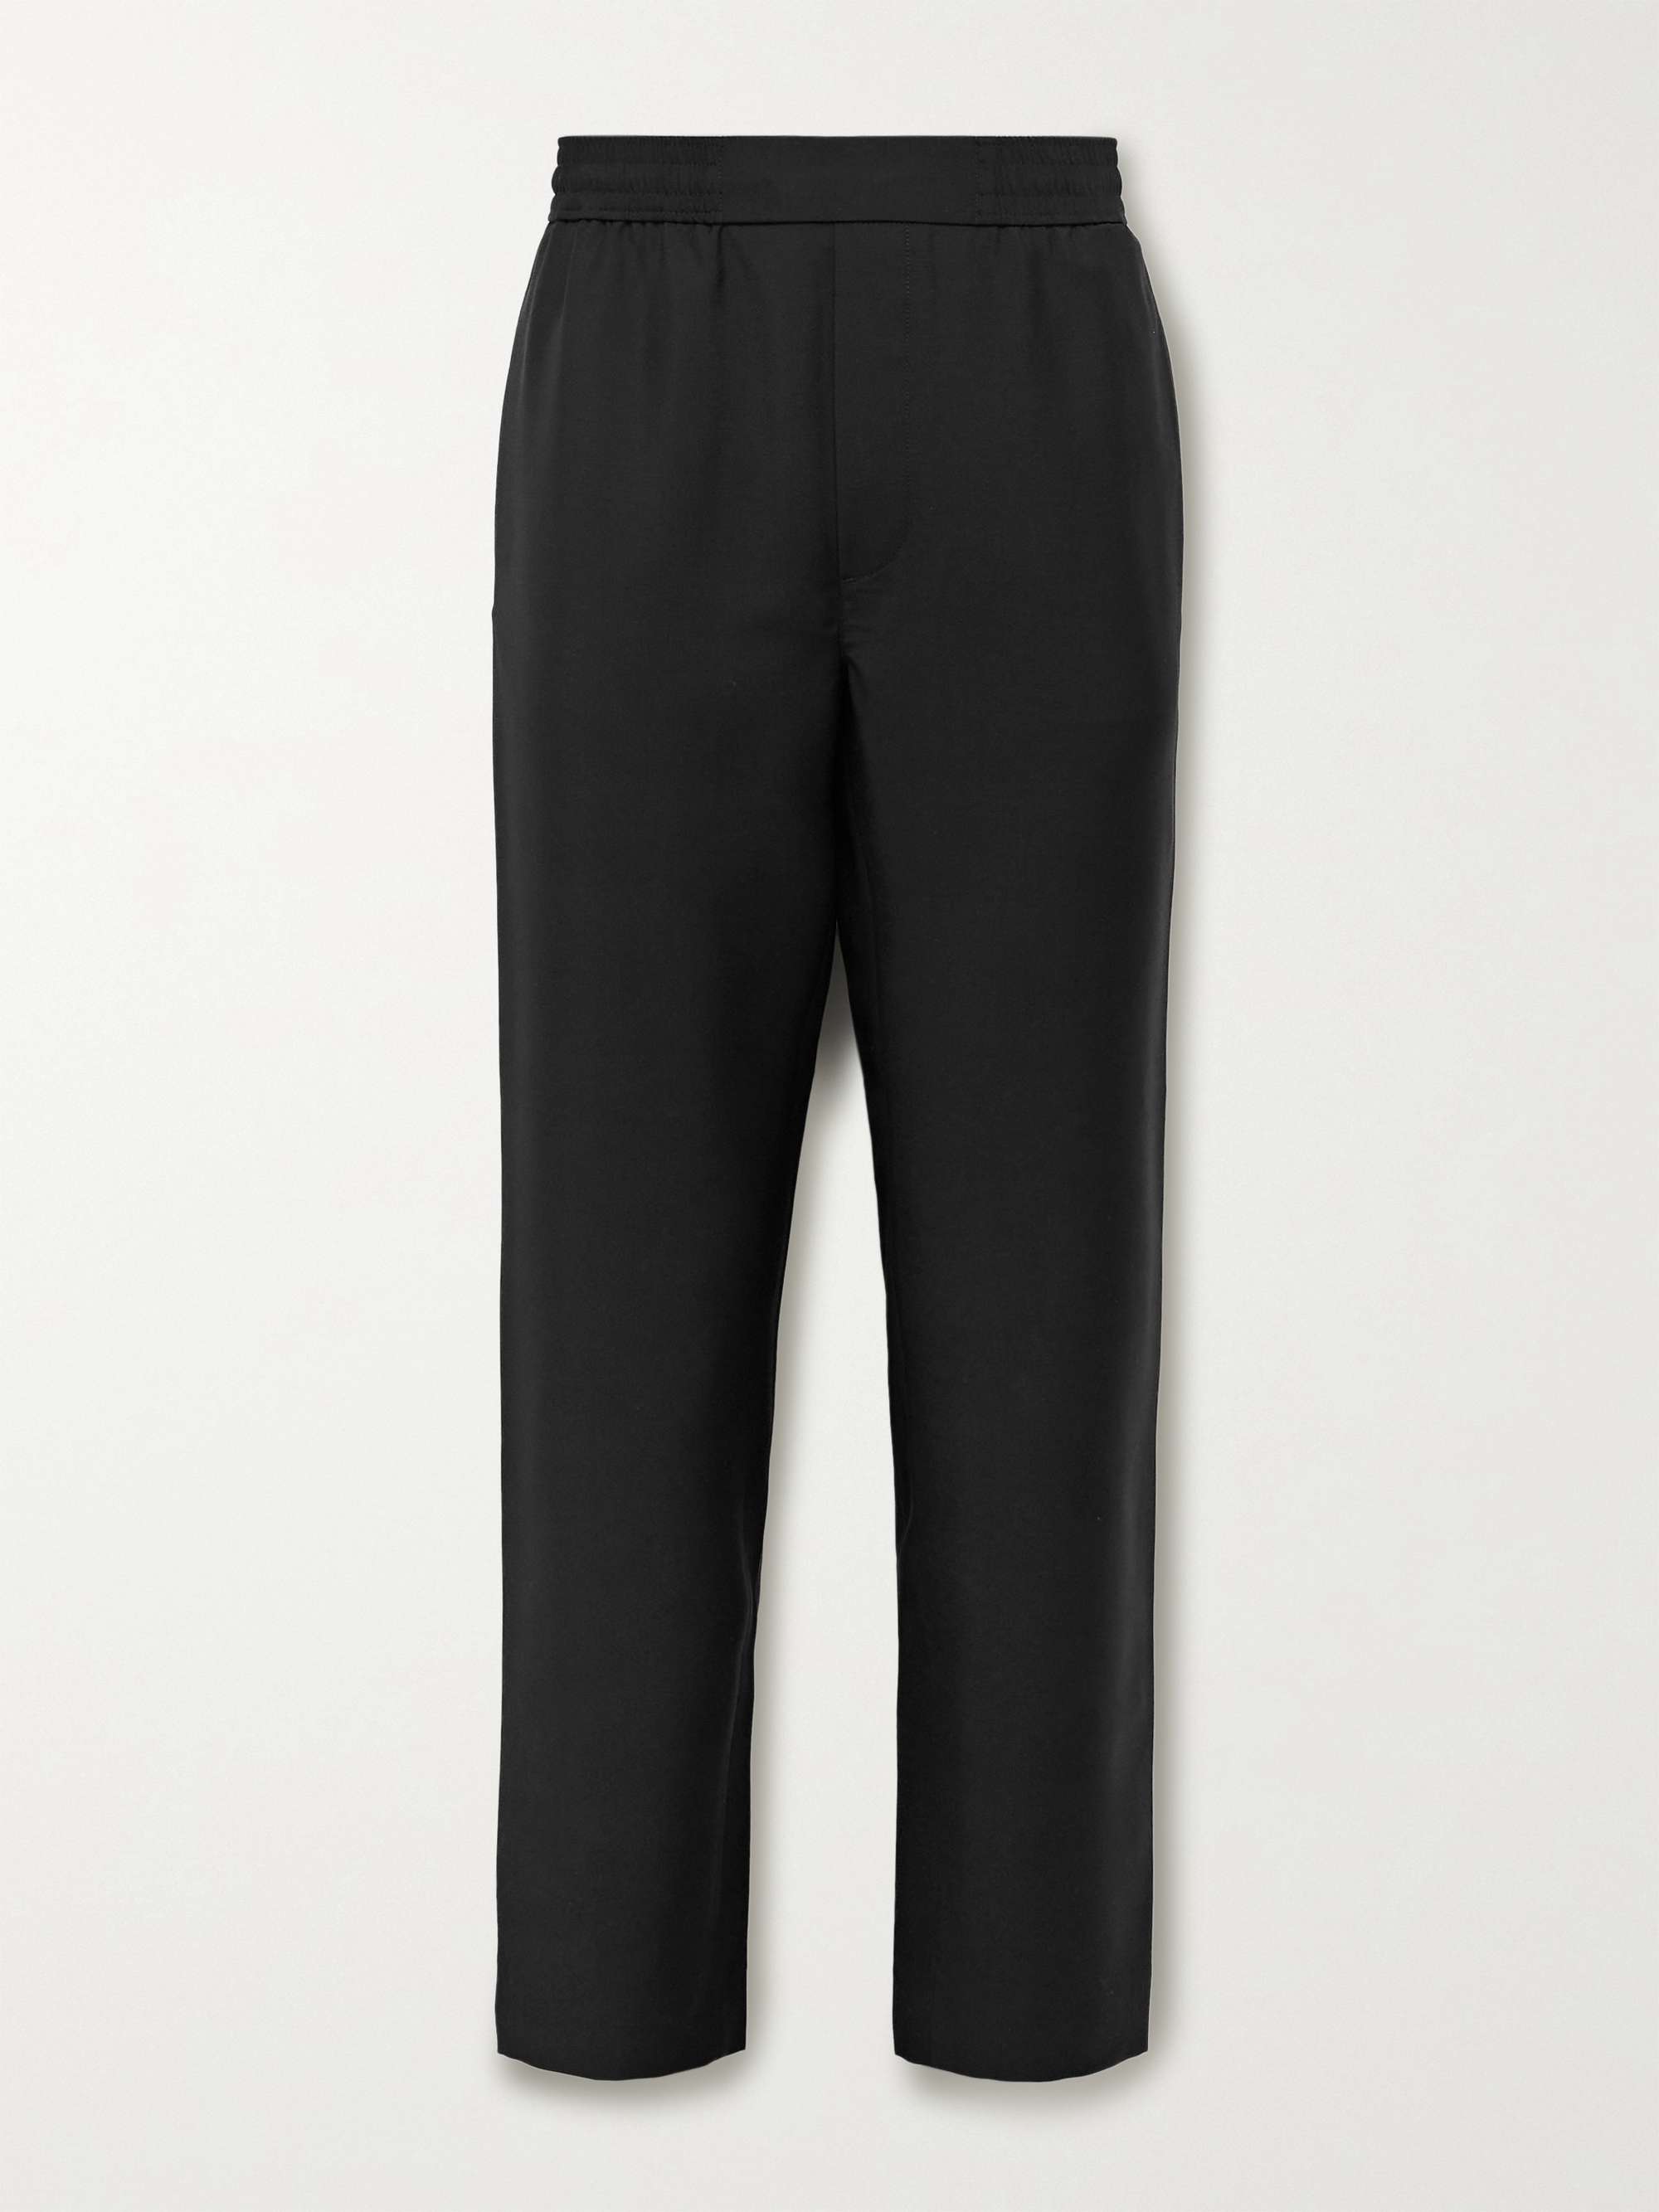 ACNE STUDIOS Pismo Wool and Mohair-Blend Trousers